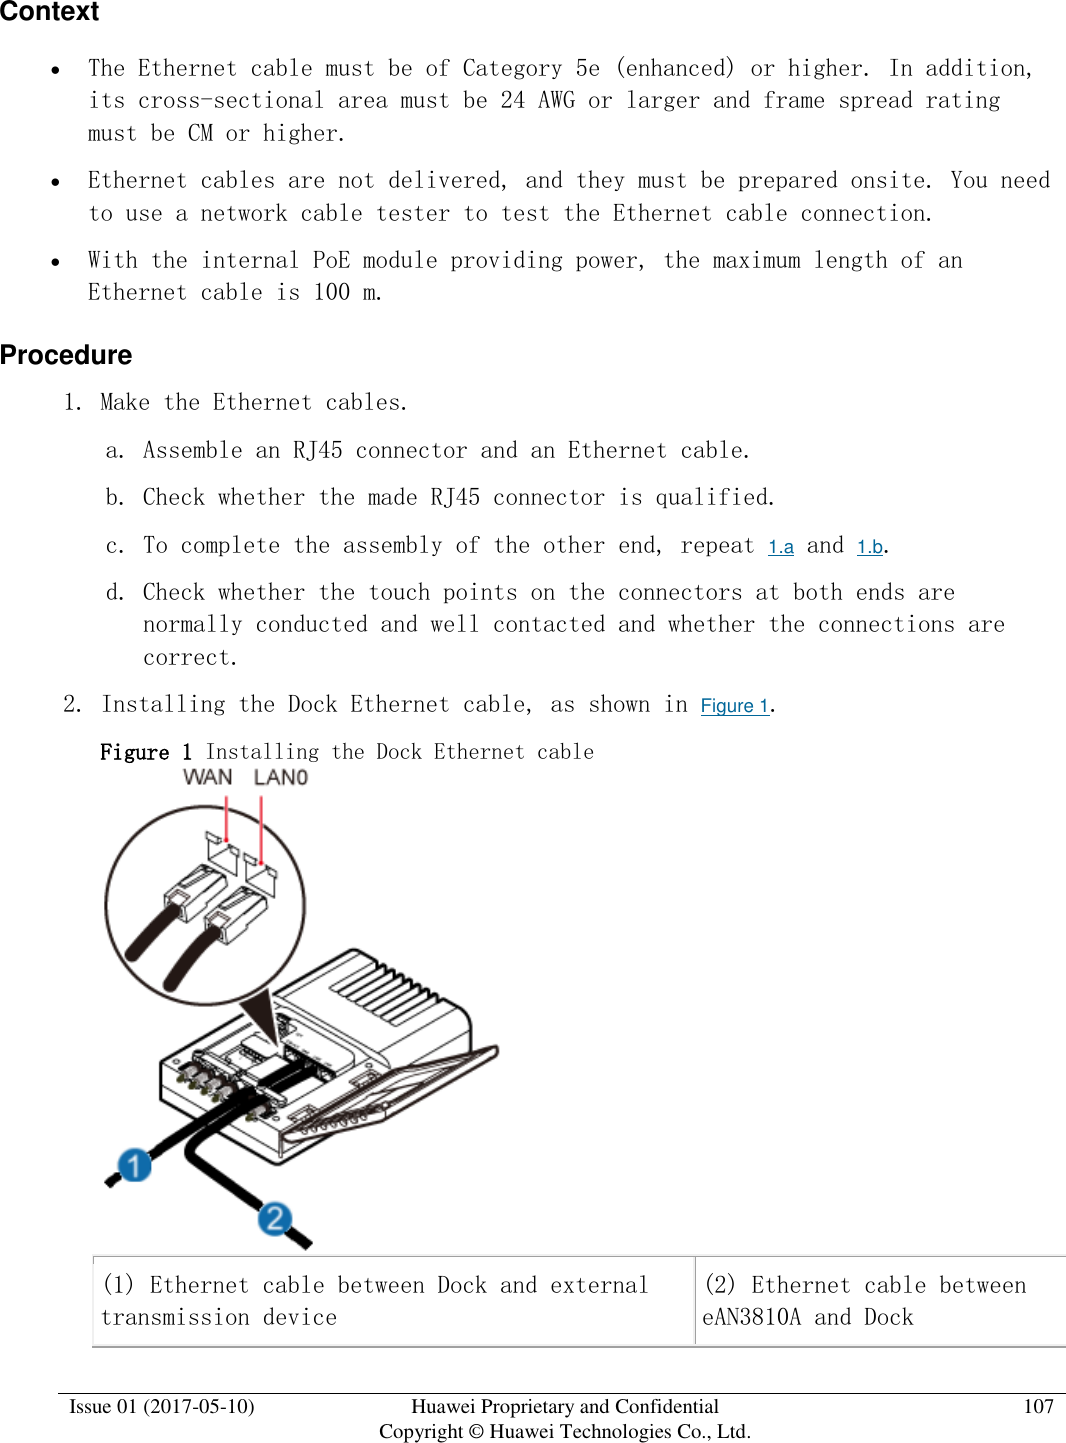  Issue 01 (2017-05-10) Huawei Proprietary and Confidential      Copyright © Huawei Technologies Co., Ltd. 107  Context  The Ethernet cable must be of Category 5e (enhanced) or higher. In addition, its cross-sectional area must be 24 AWG or larger and frame spread rating must be CM or higher.  Ethernet cables are not delivered, and they must be prepared onsite. You need to use a network cable tester to test the Ethernet cable connection.  With the internal PoE module providing power, the maximum length of an Ethernet cable is 100 m. Procedure 1. Make the Ethernet cables.  a. Assemble an RJ45 connector and an Ethernet cable. b. Check whether the made RJ45 connector is qualified. c. To complete the assembly of the other end, repeat 1.a and 1.b.  d. Check whether the touch points on the connectors at both ends are normally conducted and well contacted and whether the connections are correct. 2. Installing the Dock Ethernet cable, as shown in Figure 1.  Figure 1 Installing the Dock Ethernet cable   (1) Ethernet cable between Dock and external transmission device (2) Ethernet cable between eAN3810A and Dock 